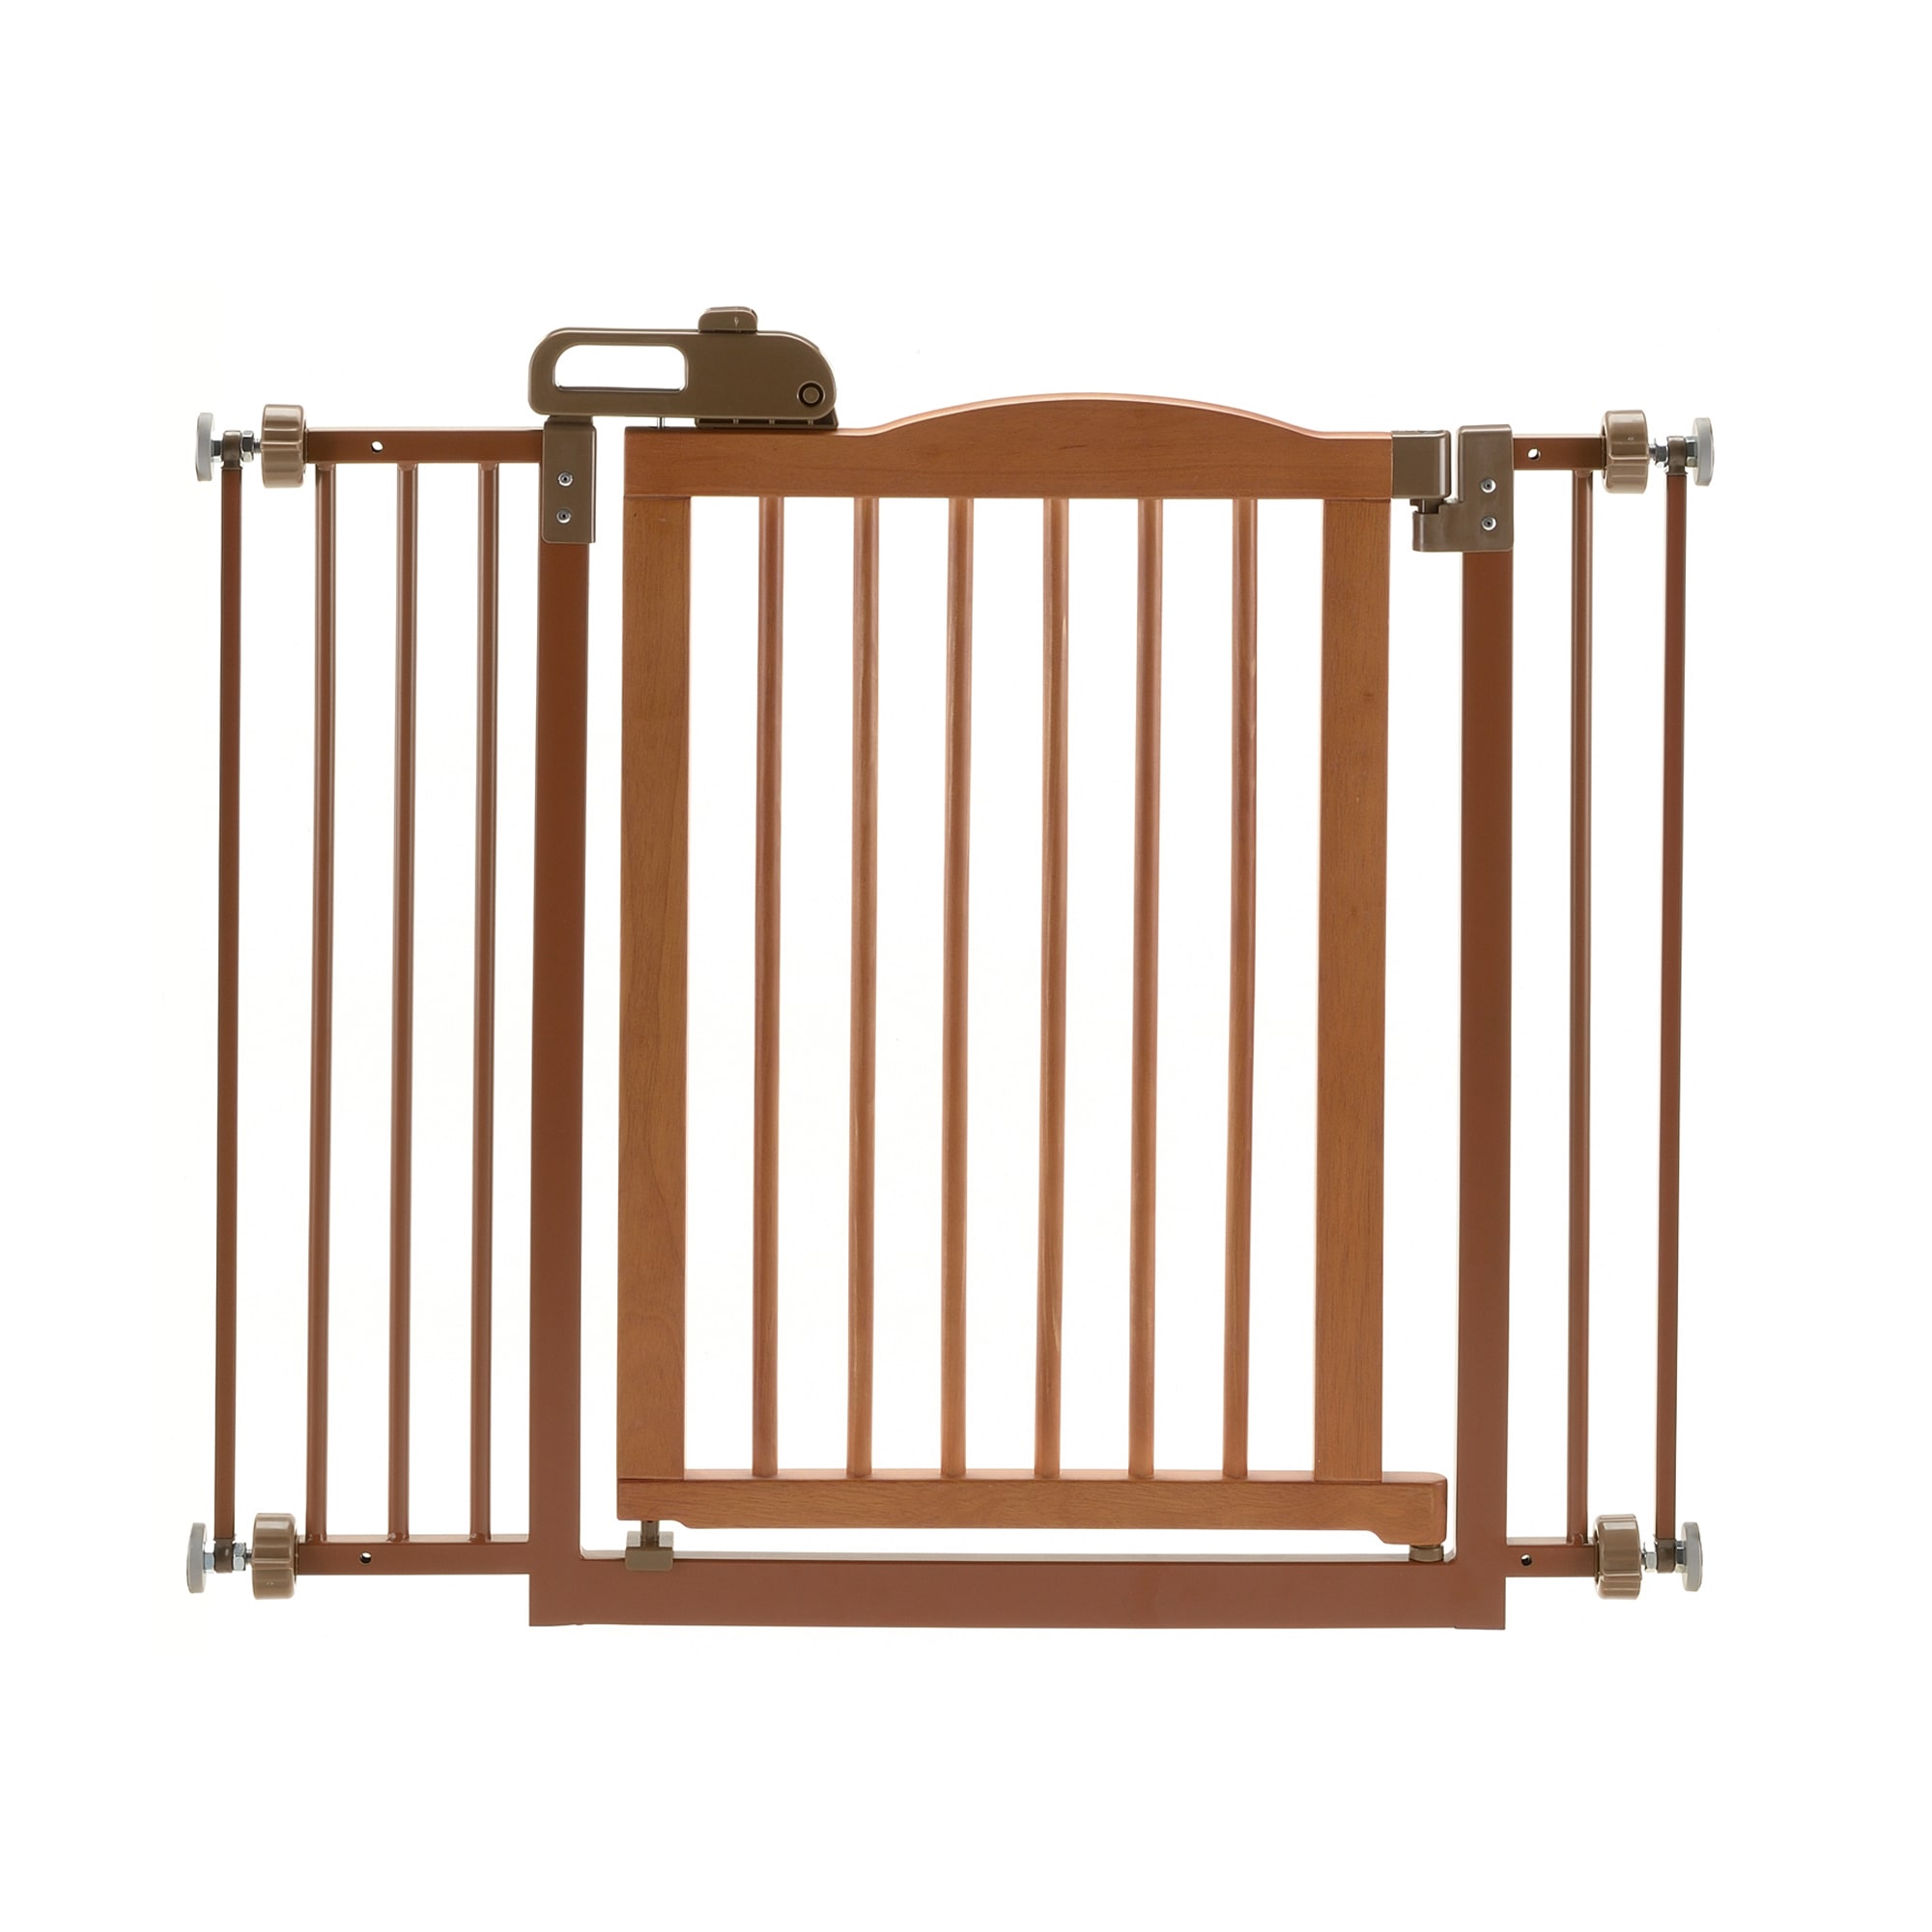 Photos - Pet Carrier / Crate Richell One-Touch Brown Pet Gate II, 36.4" x 30.5" x 2", 12.6 LBS, 